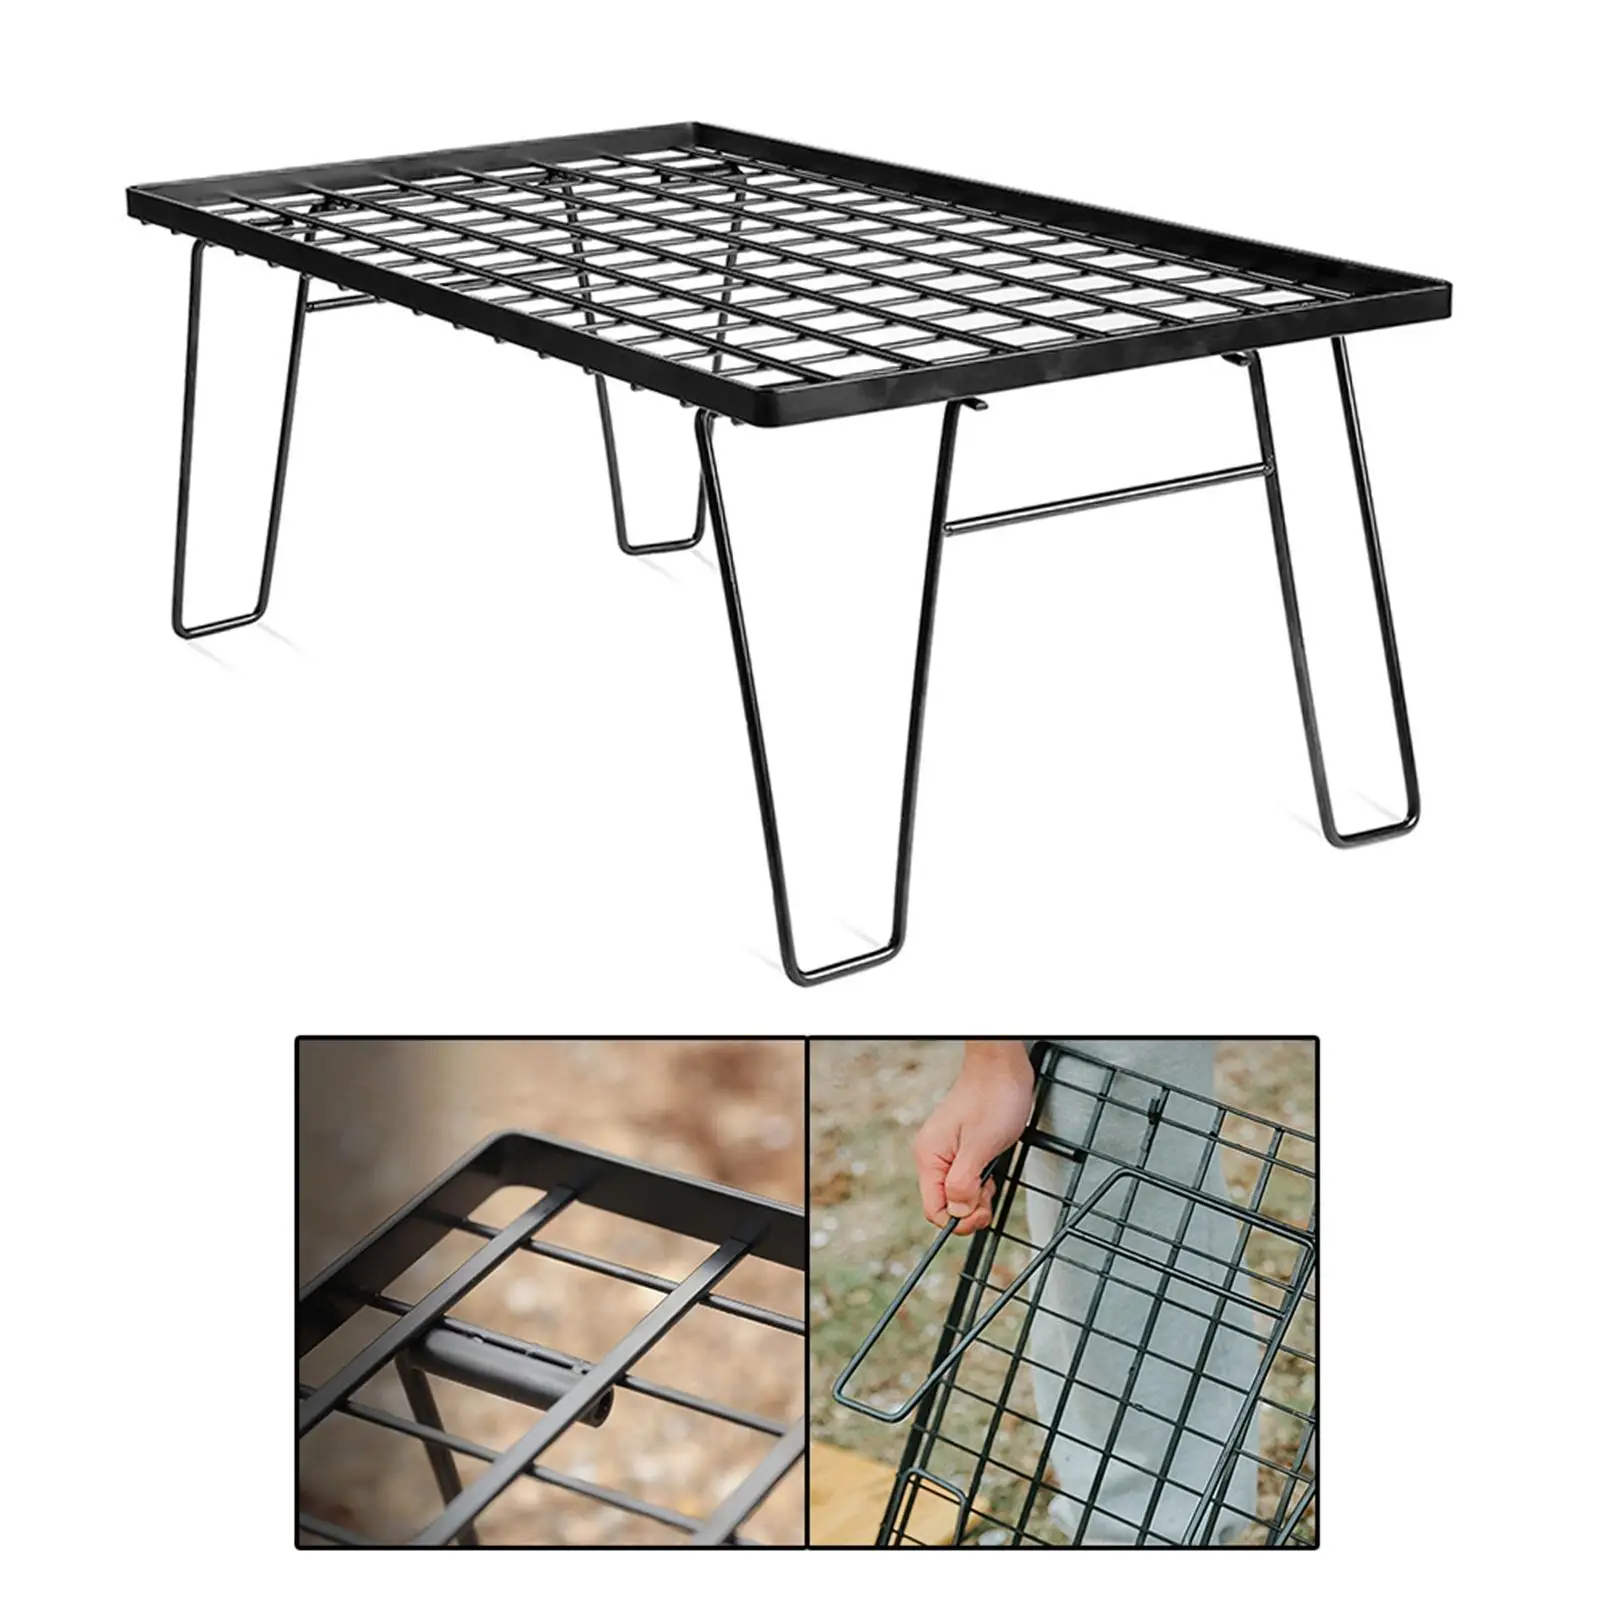 Outdoor Folding Table Lightweight Metal Barbecue Table Multifunctional Desk Furniture Camping Grill Rack for Fishing BBQ Garden